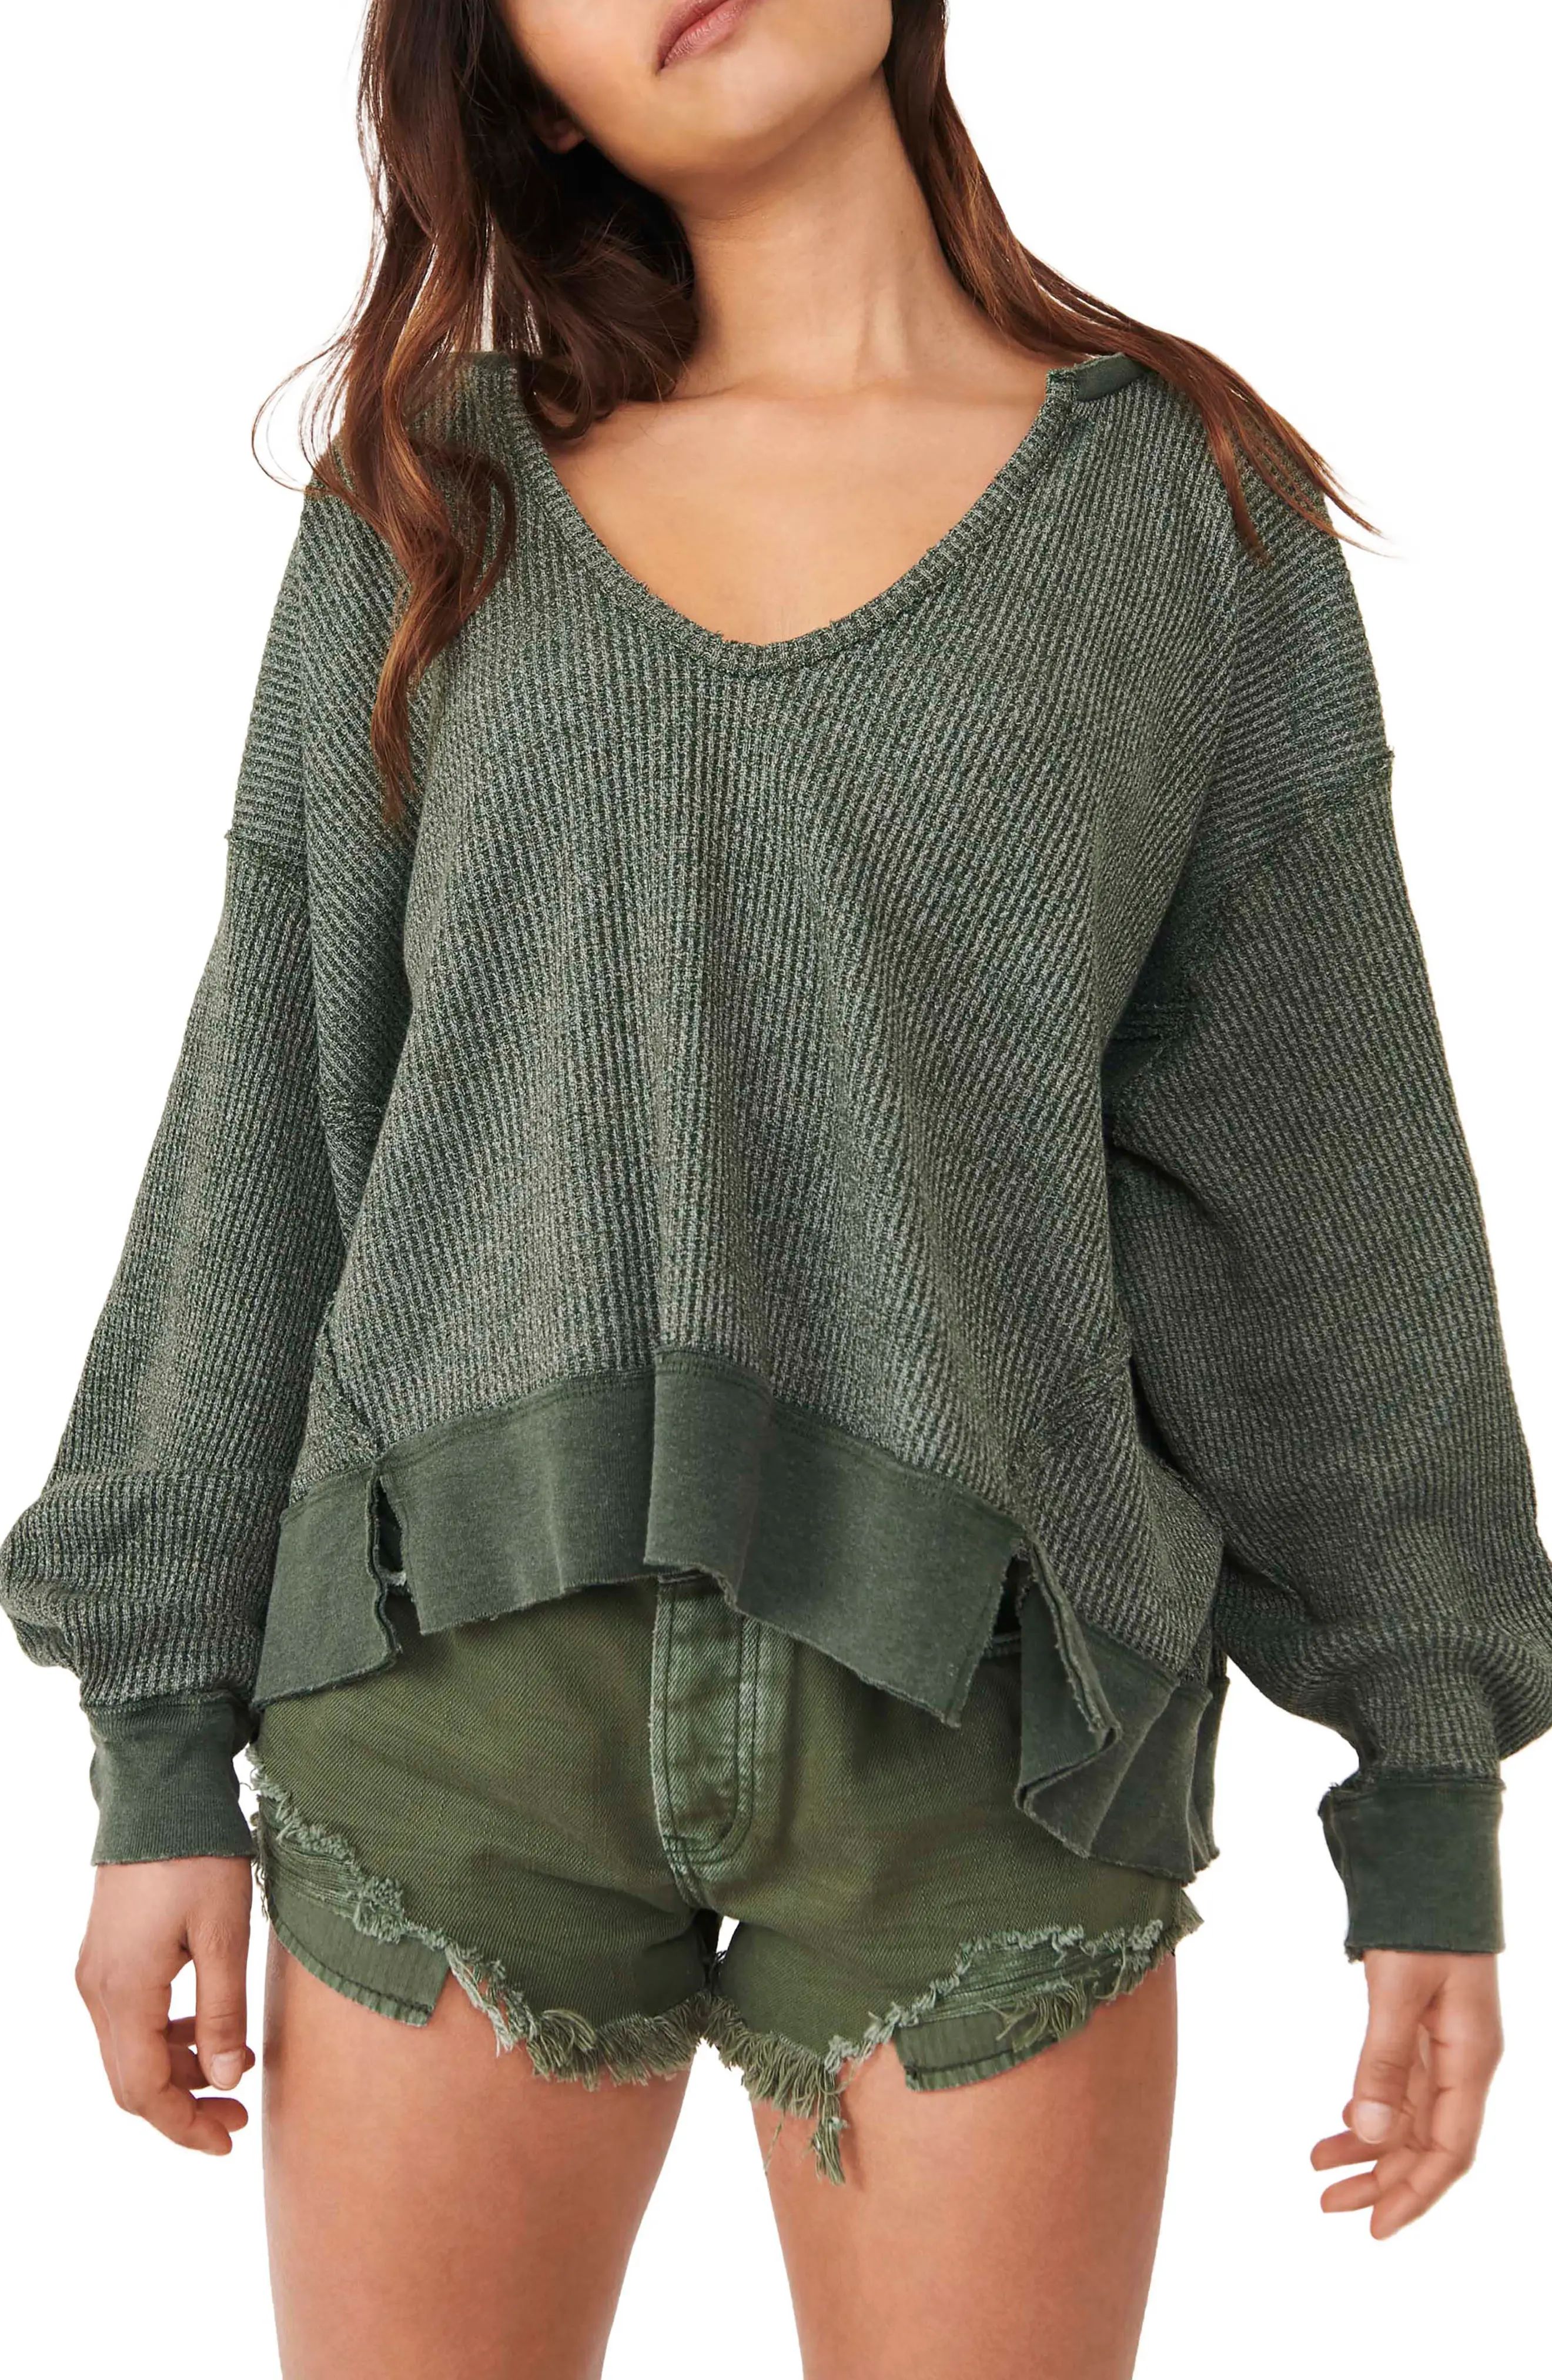 Women's Free People Women's We The Free Buttercup Oversize Thermal Top, Size X-Small - Green | Nordstrom